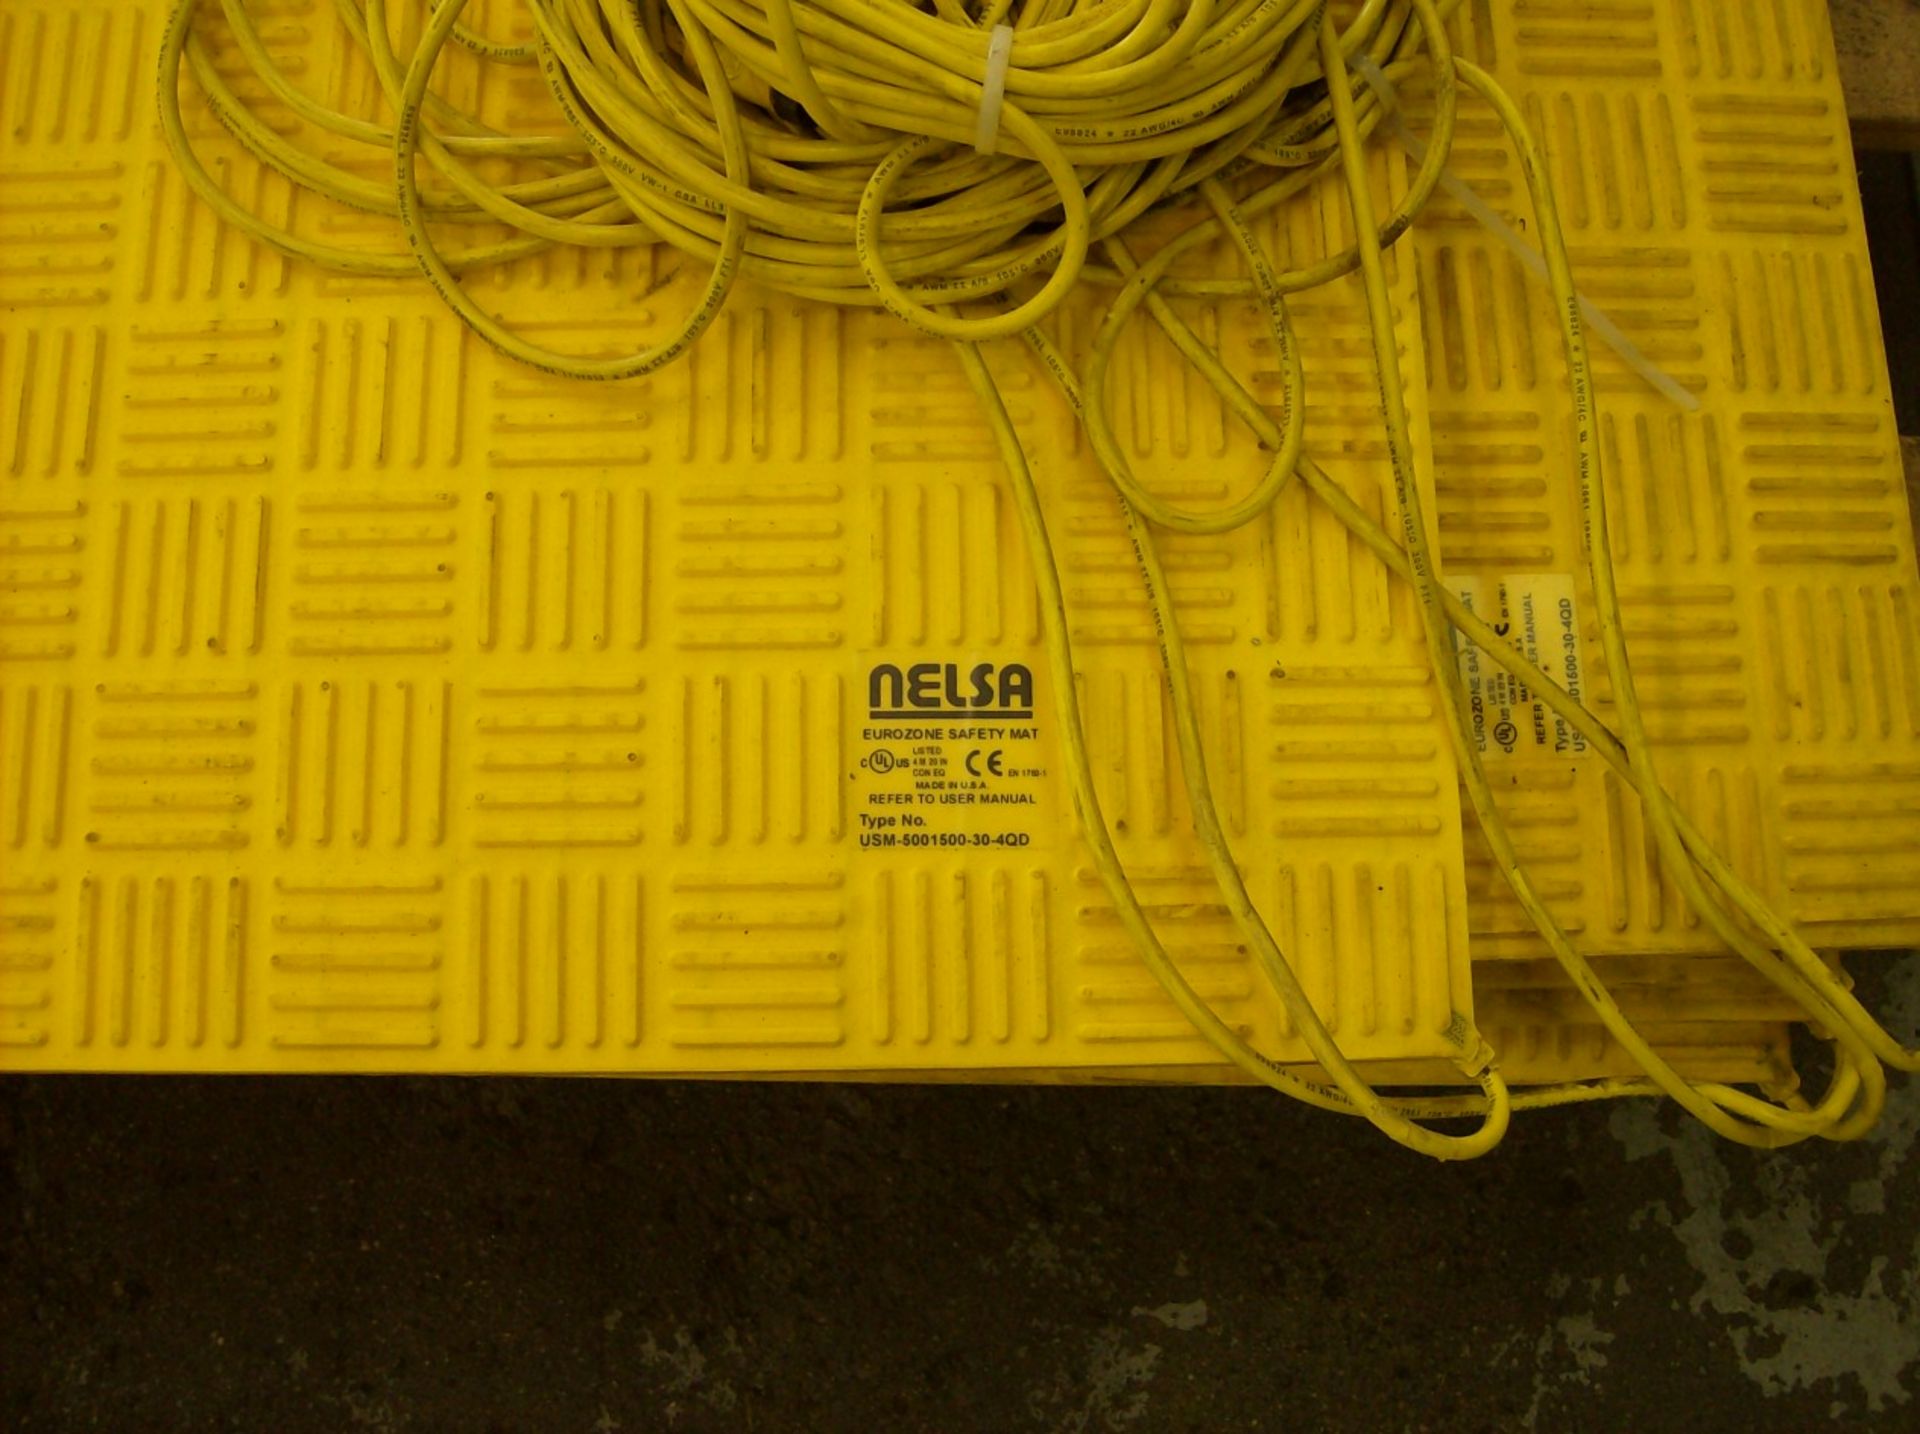 Safety floor matt’s – 5 mats – new never used with controller, Location Canada, Buyer to ship - Image 3 of 4